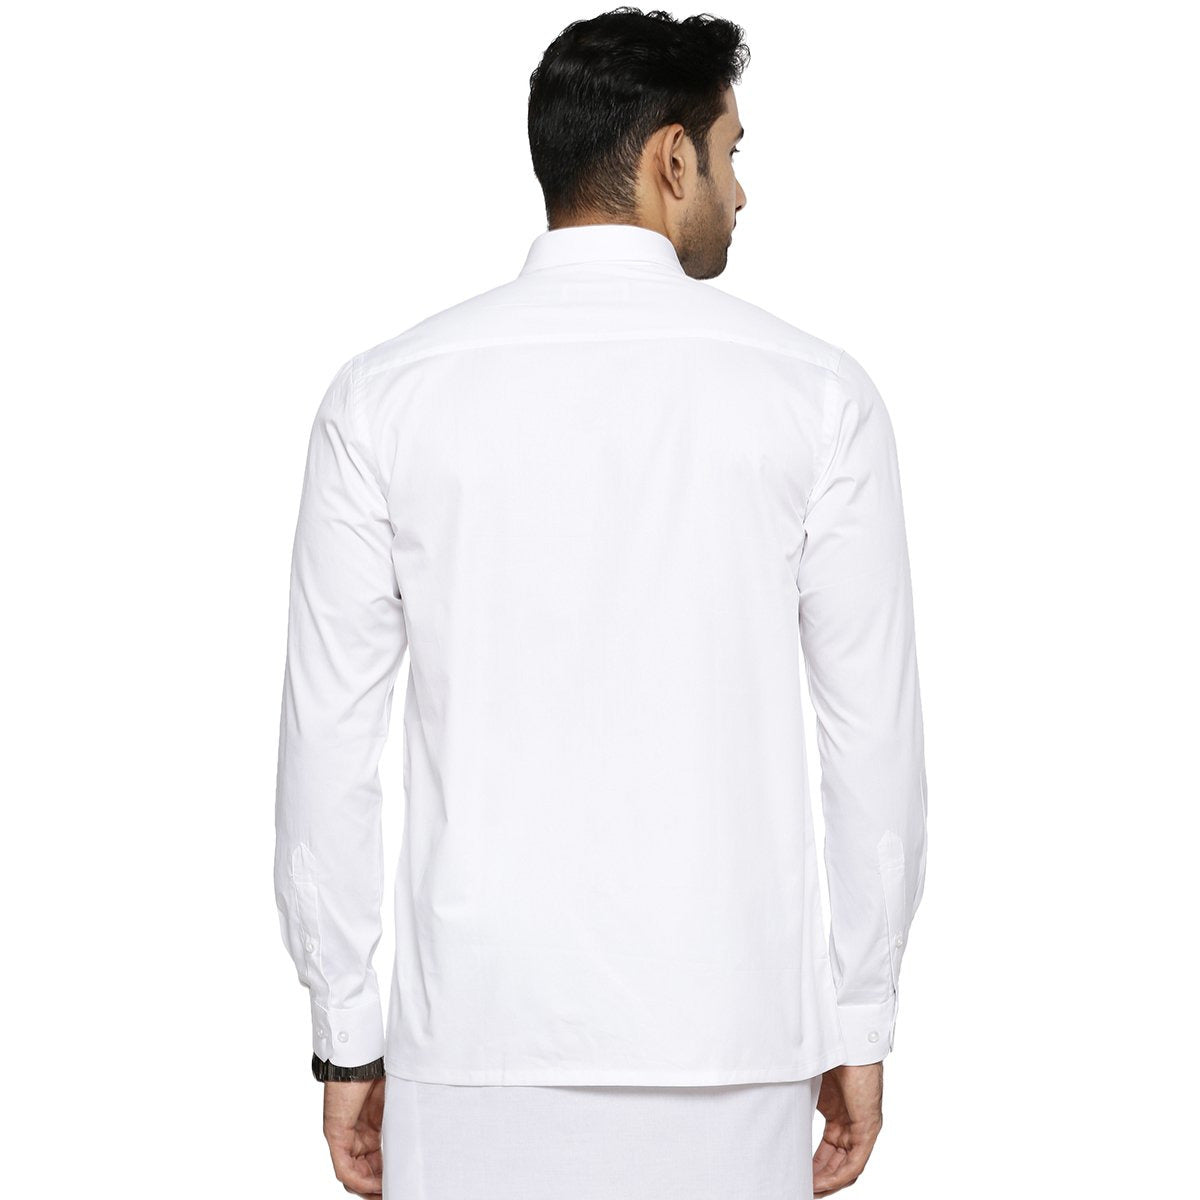 Mens 100% Cotton White Shirt Full Sleeves Classic Cotton-Back view